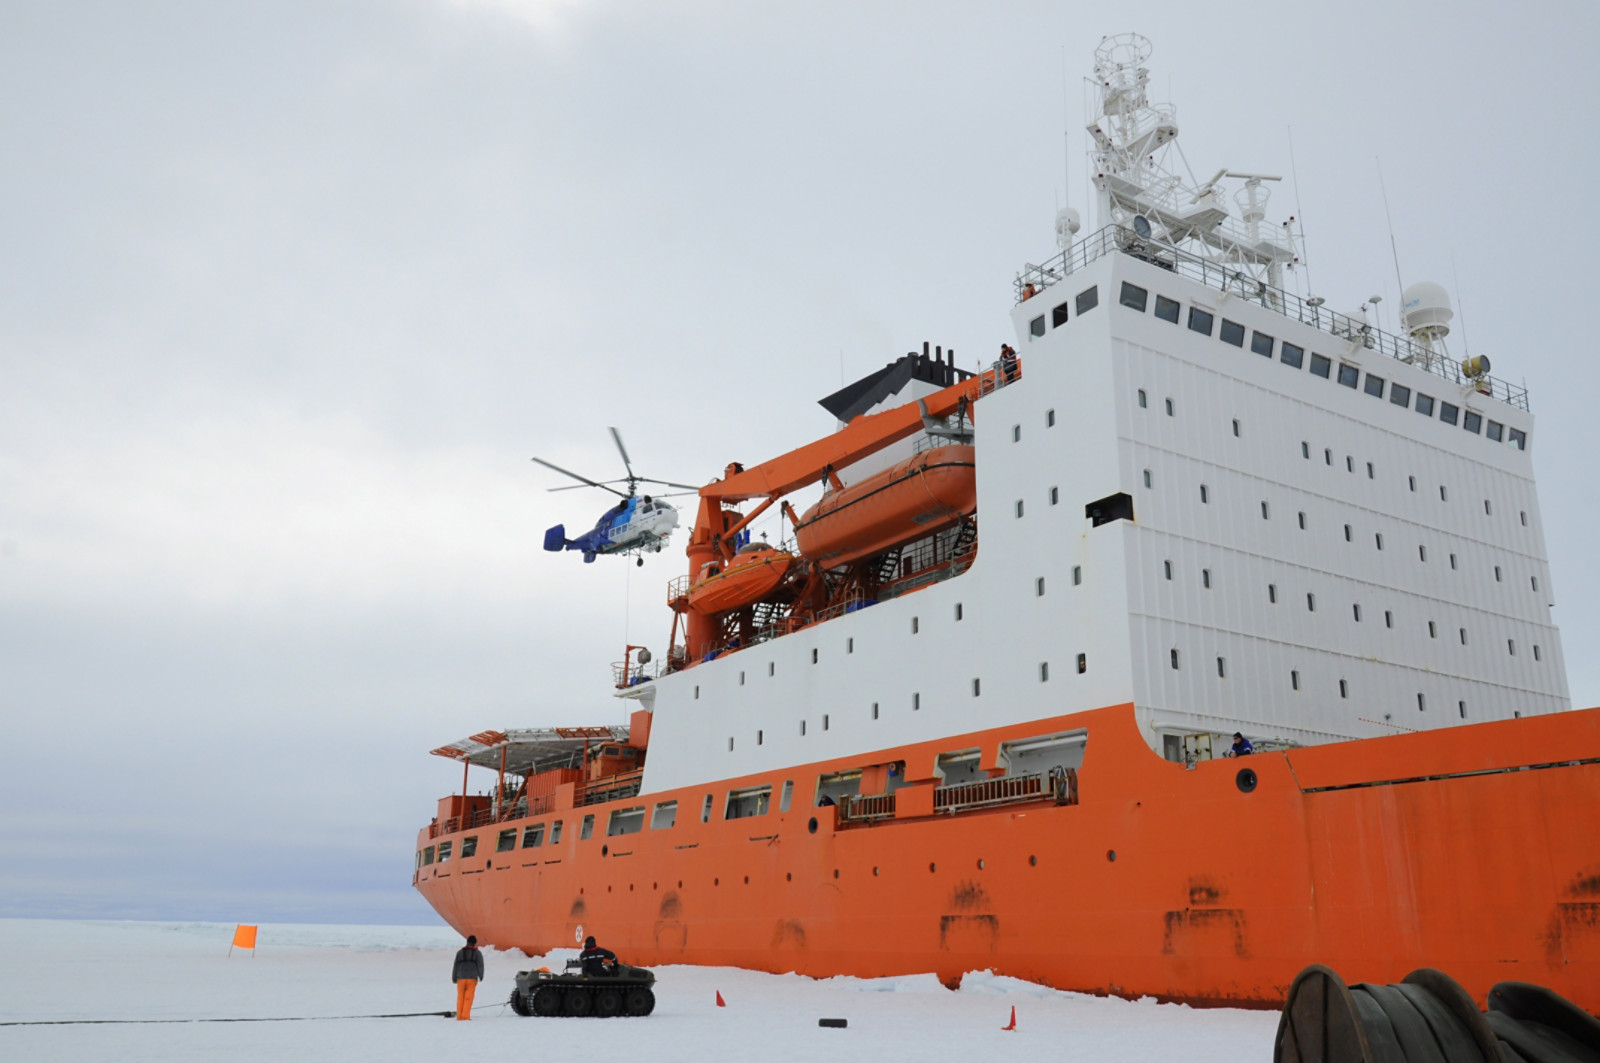 Cargo ship arrives in port for unloading on an ice floe. Antarctic.